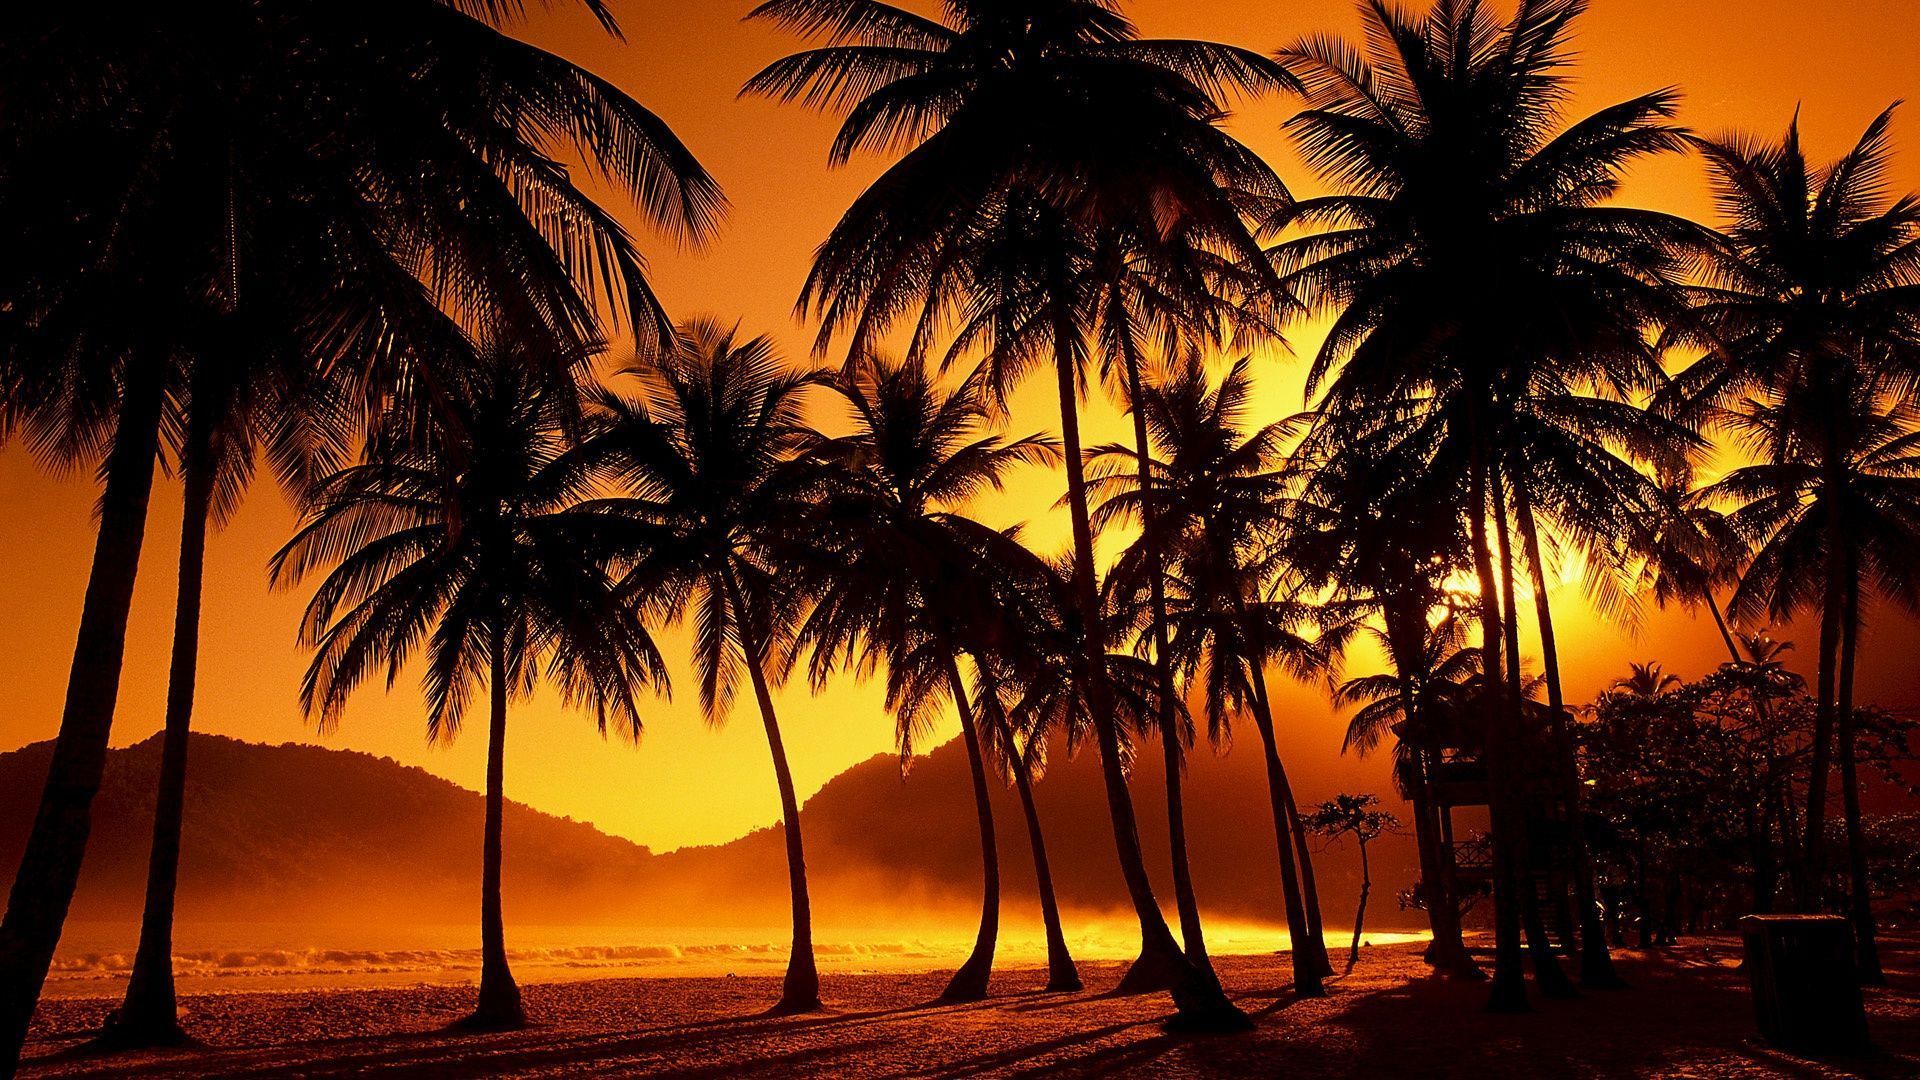 Tropical Wallpaper For Android #3240 > Mbuh.xyz